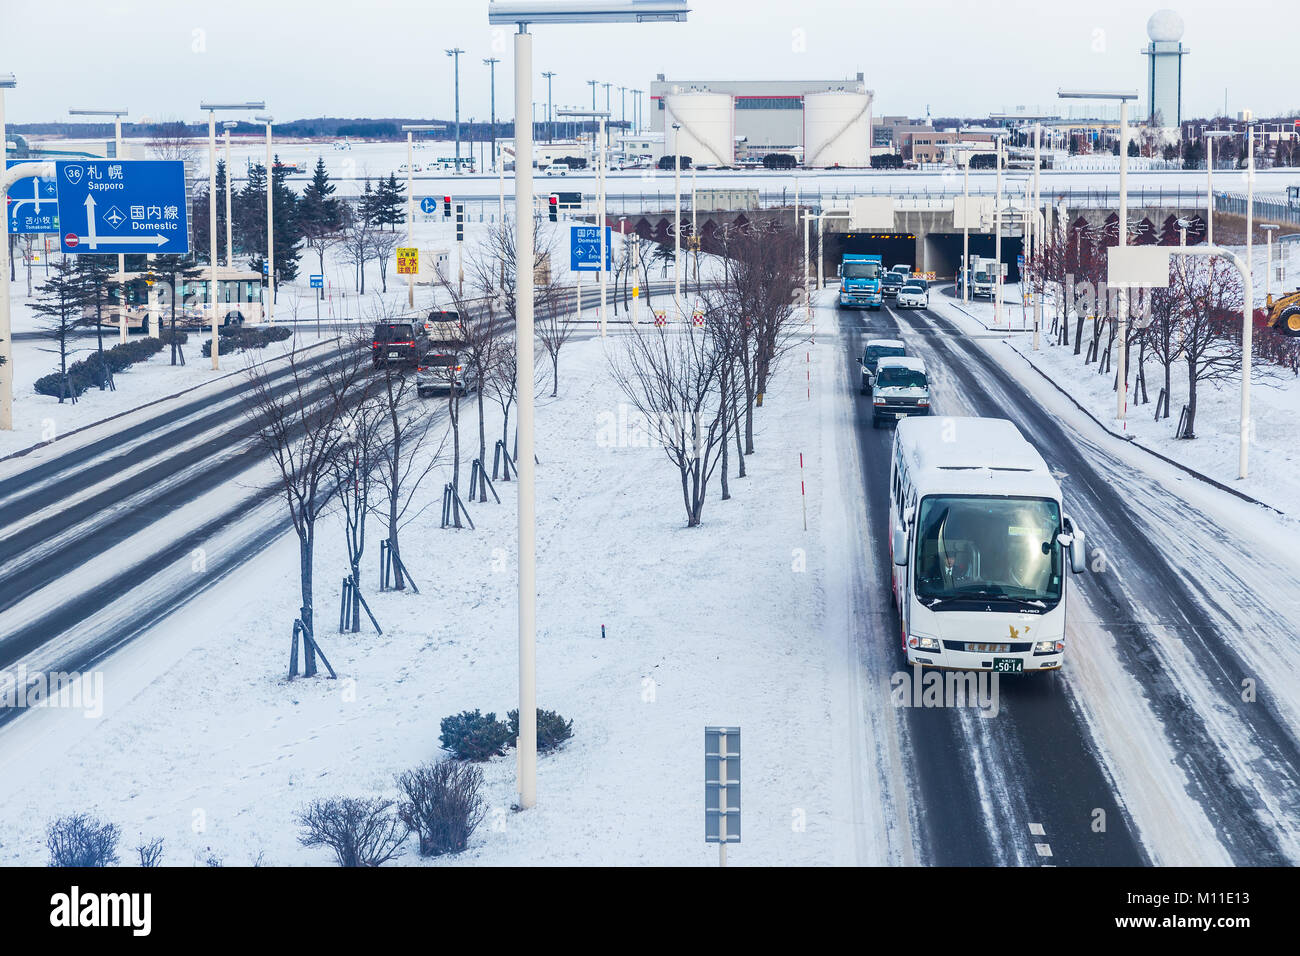 Hokkaido, Japan - 27 December 2017 - Vehicals travel on road at Chitose International Airport coverred with snow during winter in Hokkaido, Japan on D Stock Photo